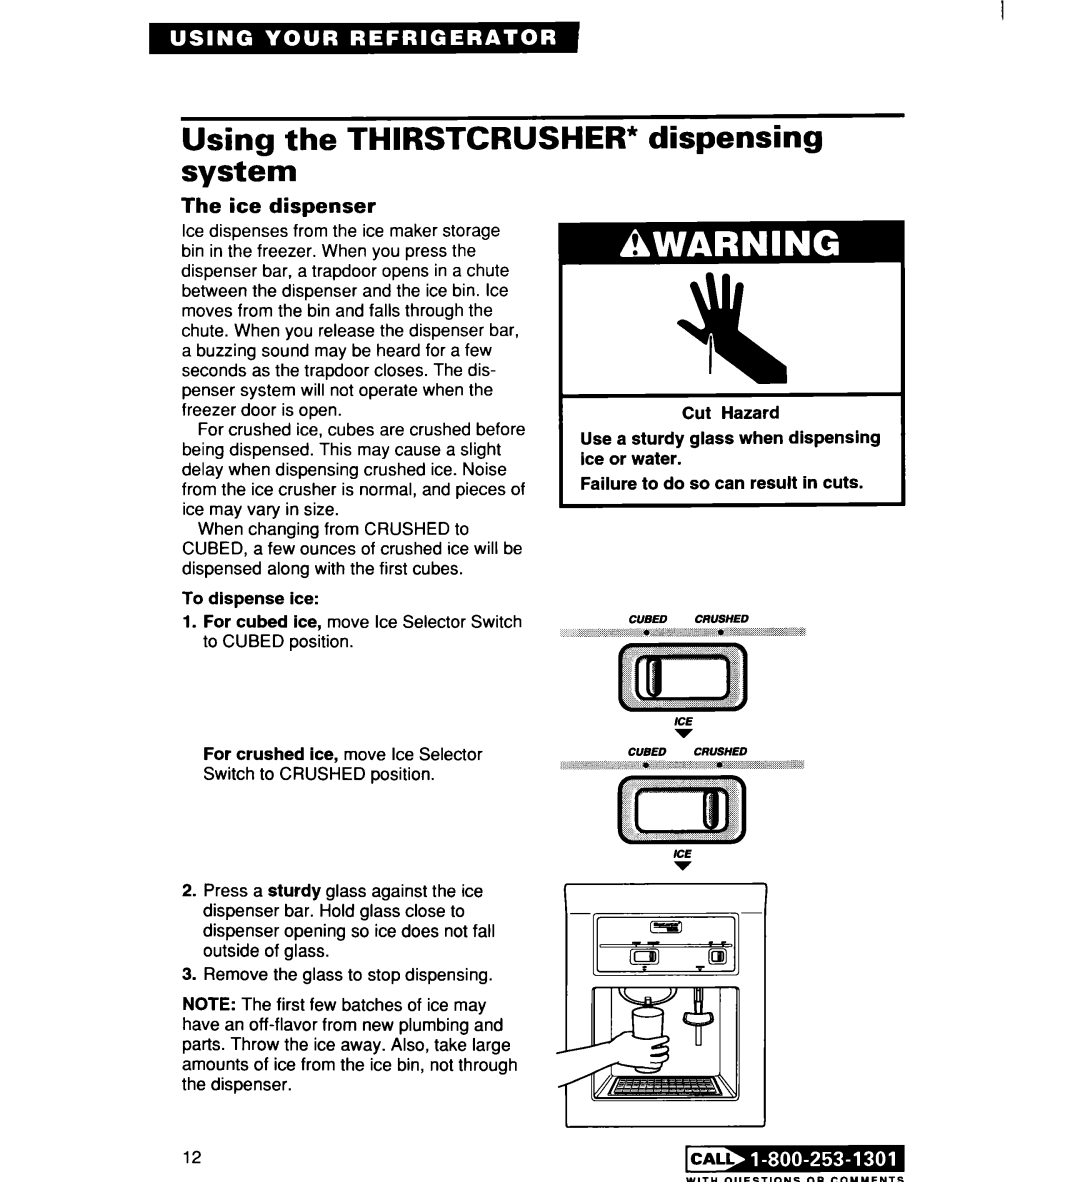 Whirlpool 2194182 warranty Using the THIRSTCRUSHER* dispensing system, The ice dispenser 